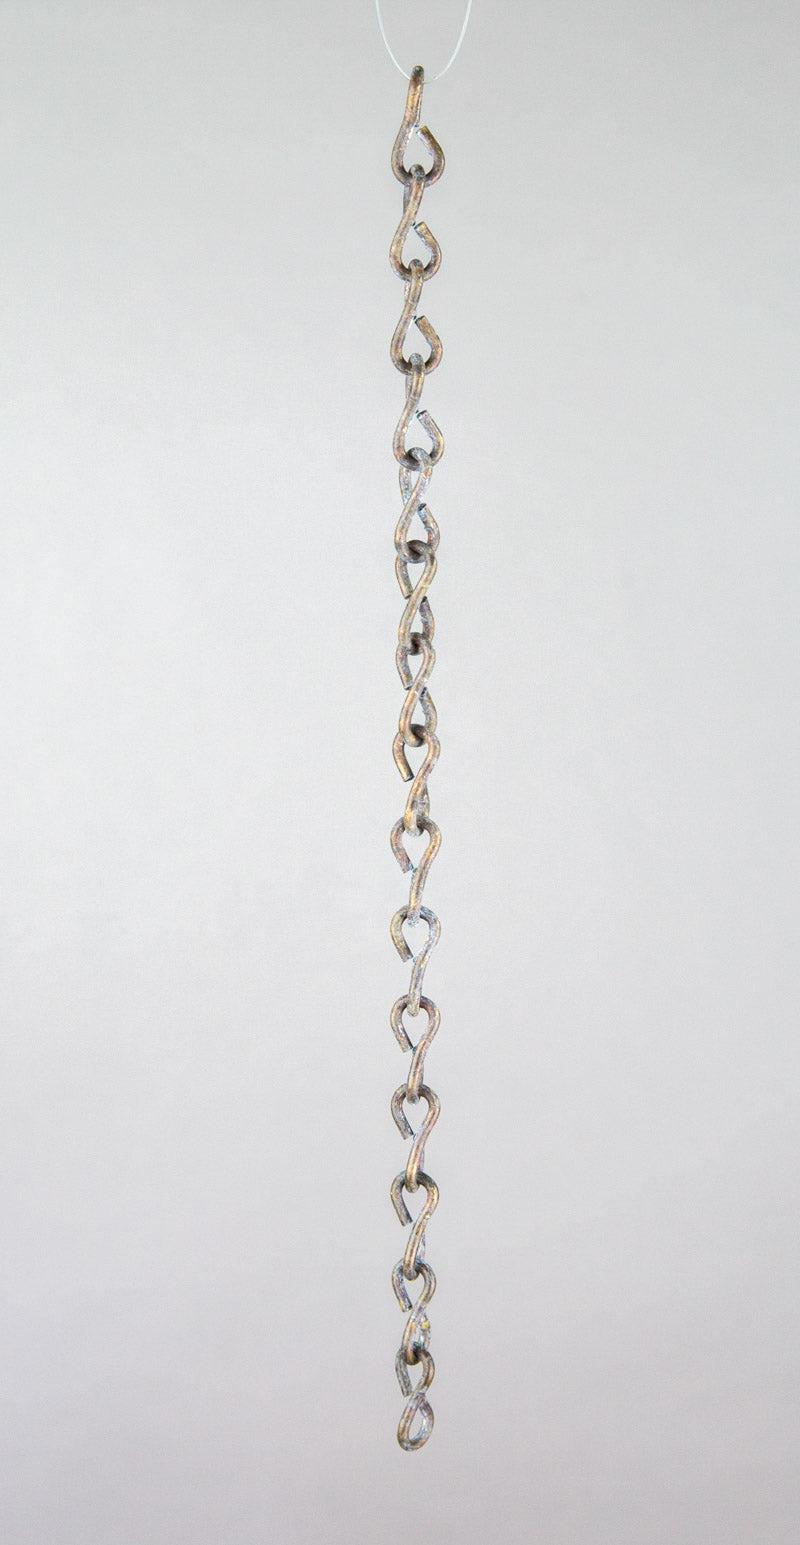 Extra #12 chain (M/L)